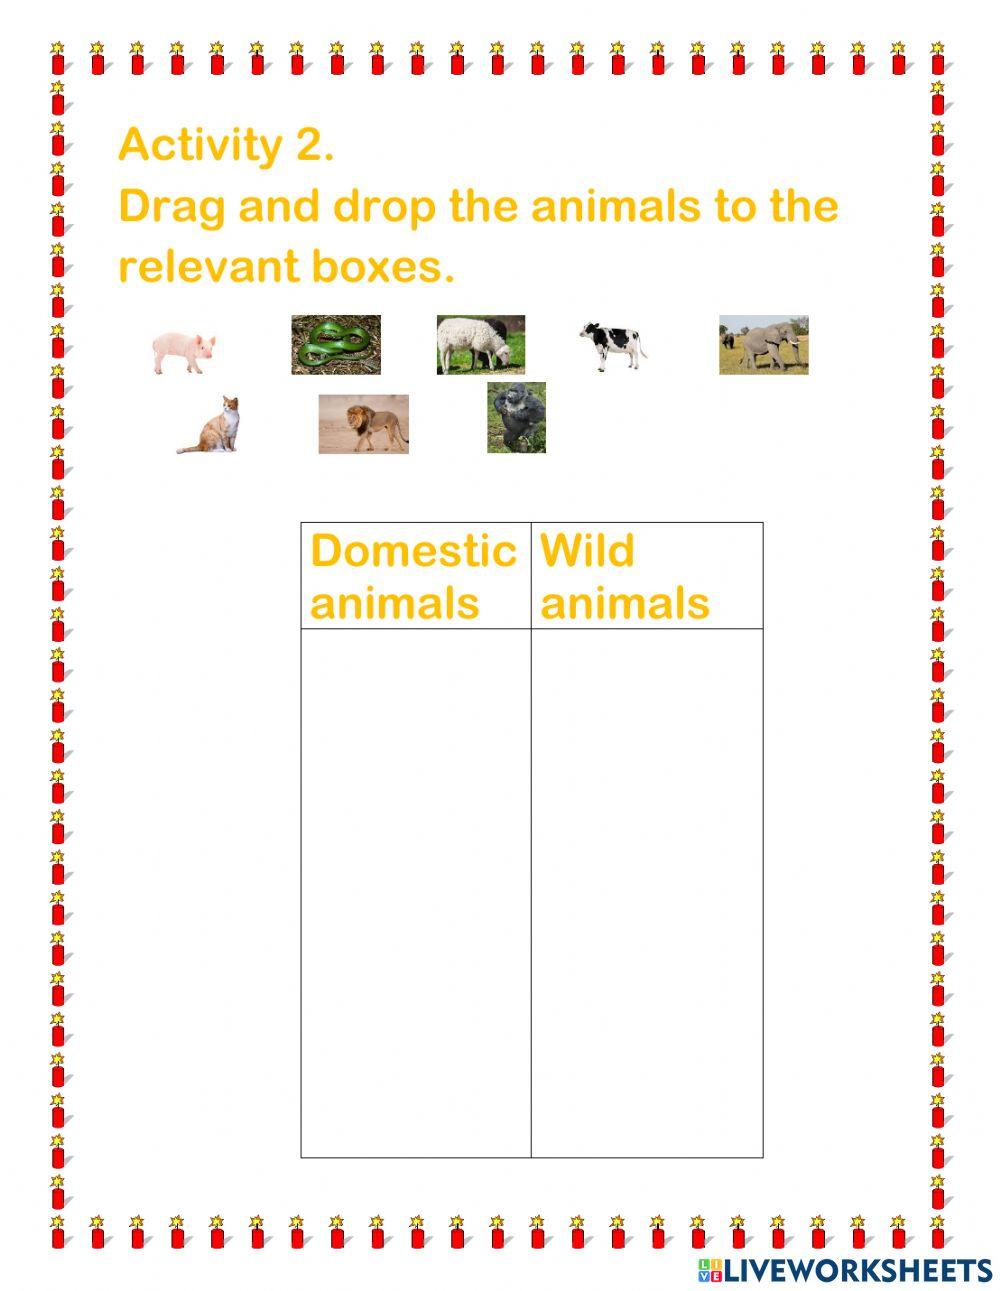 Drag and drop the animals to the relevant boxes